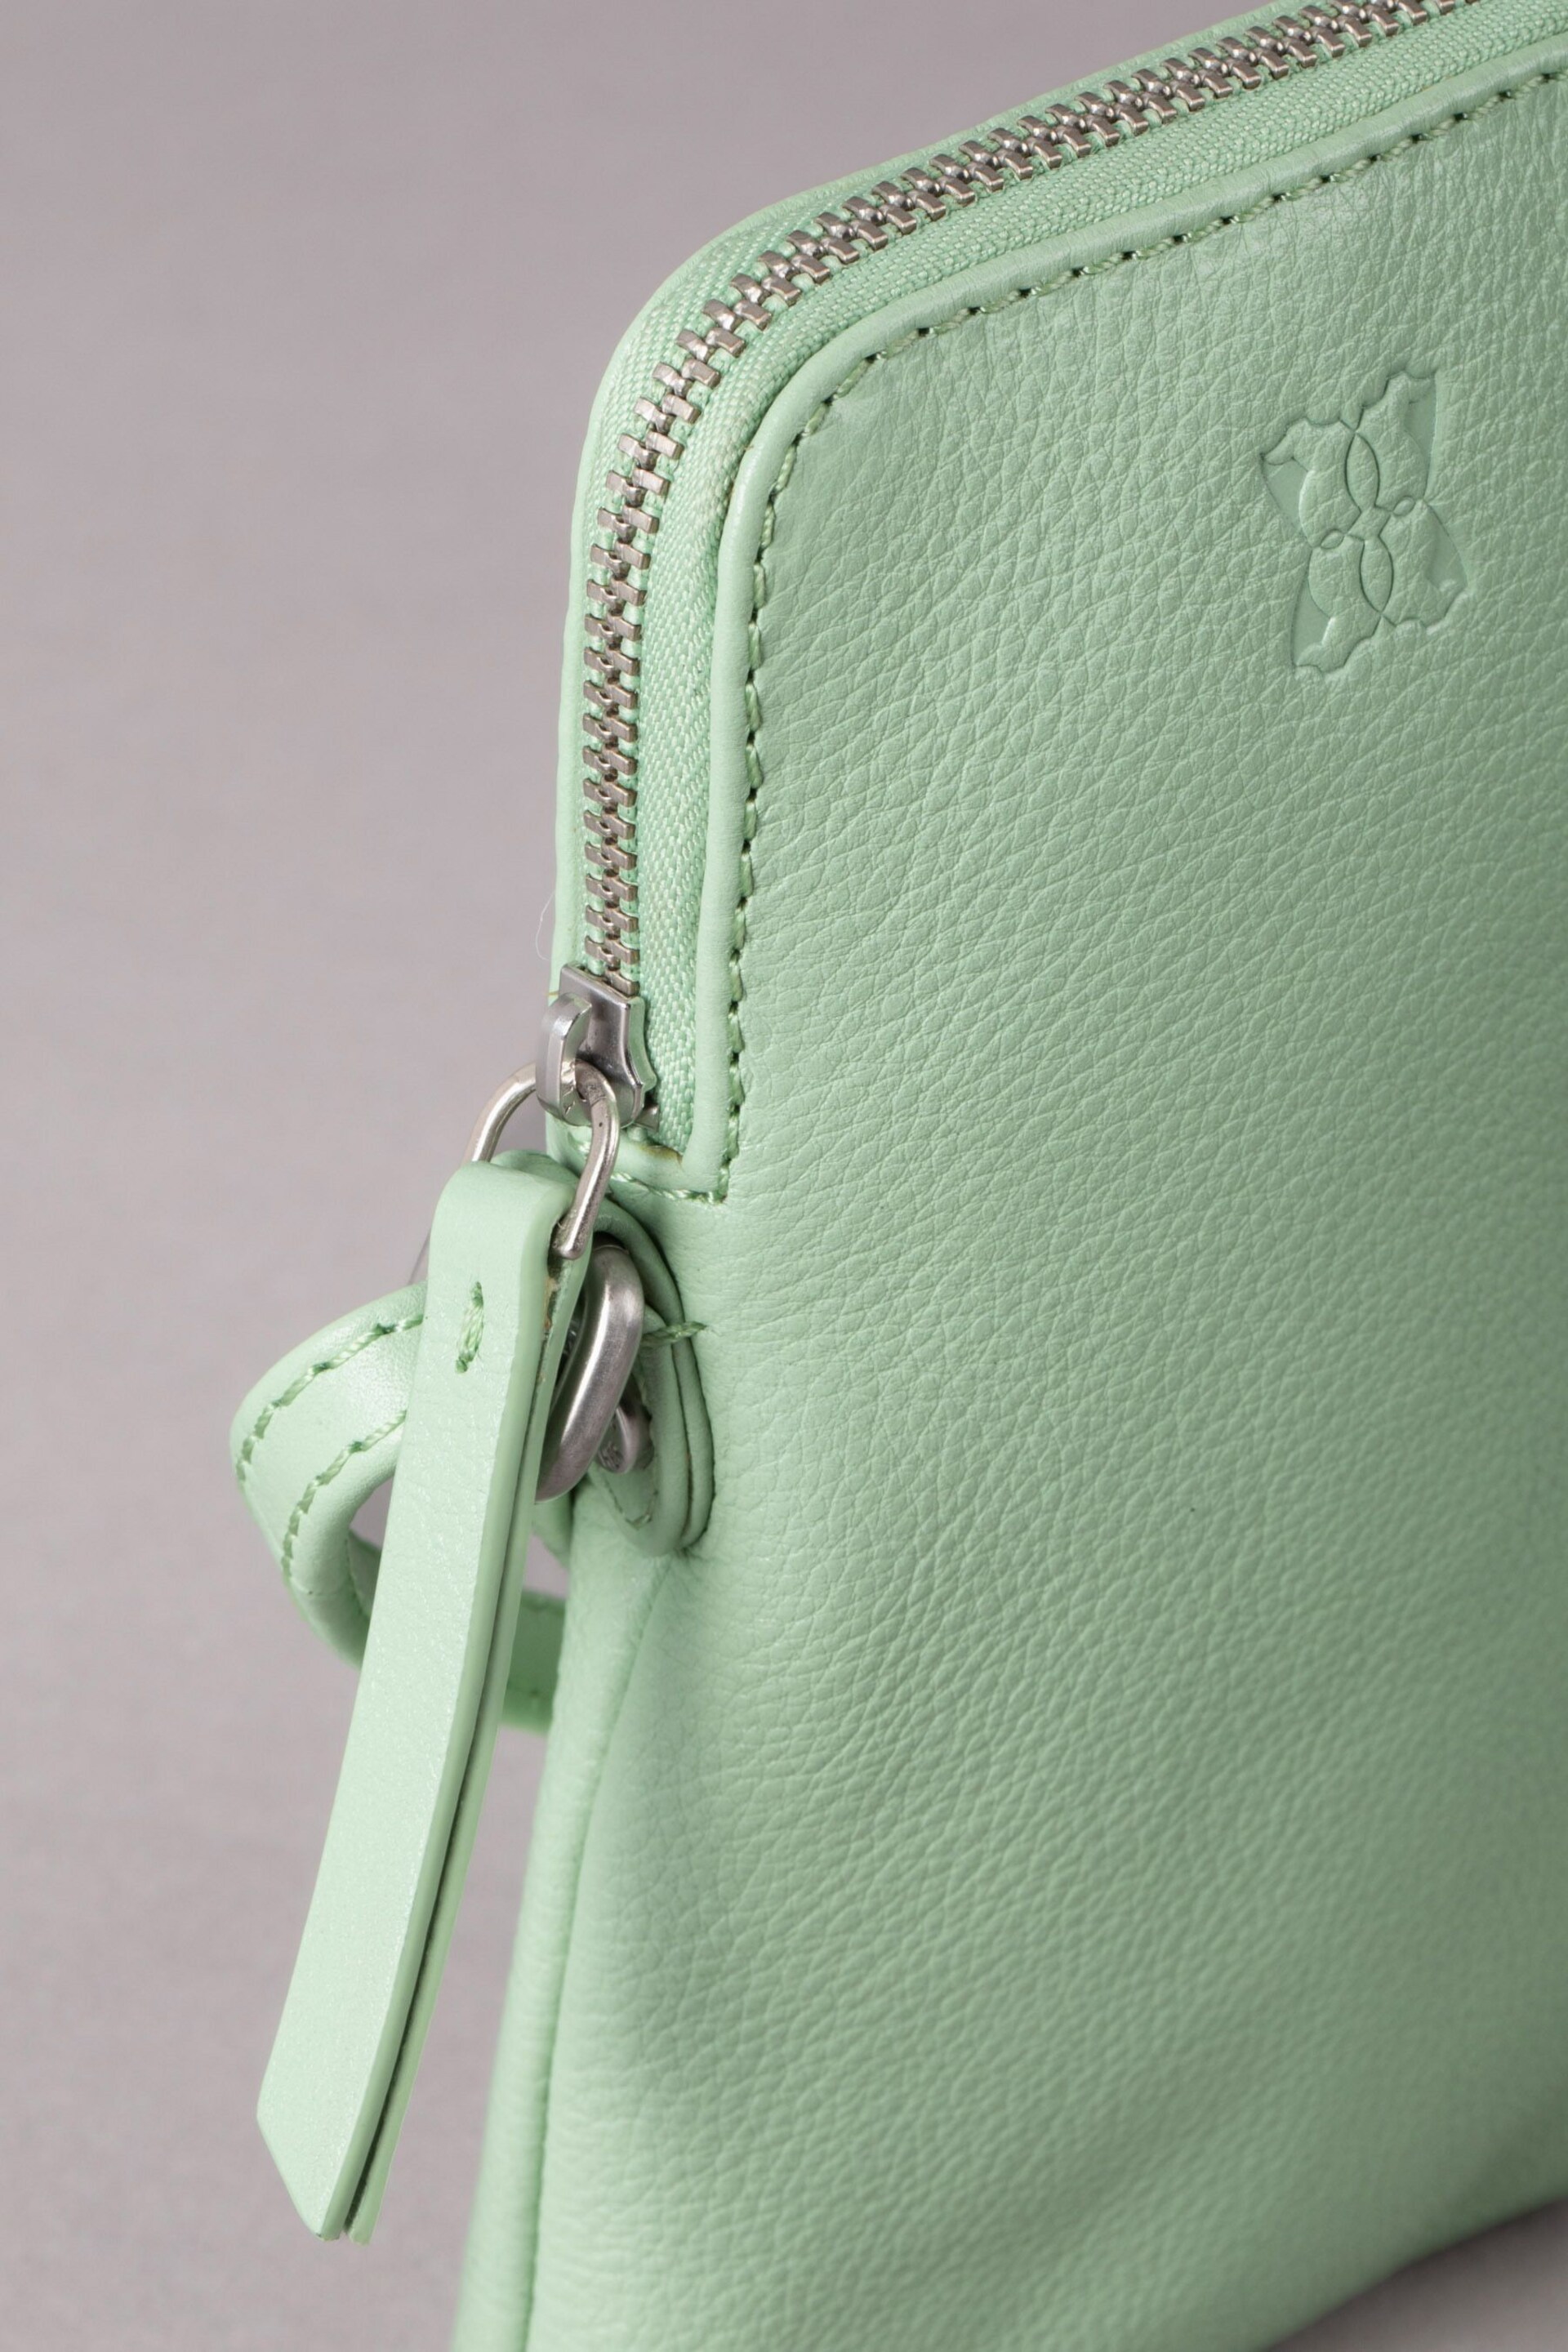 Lakeland Leather Green Coniston Leather Cross-Body Phone Pouch - Image 4 of 6